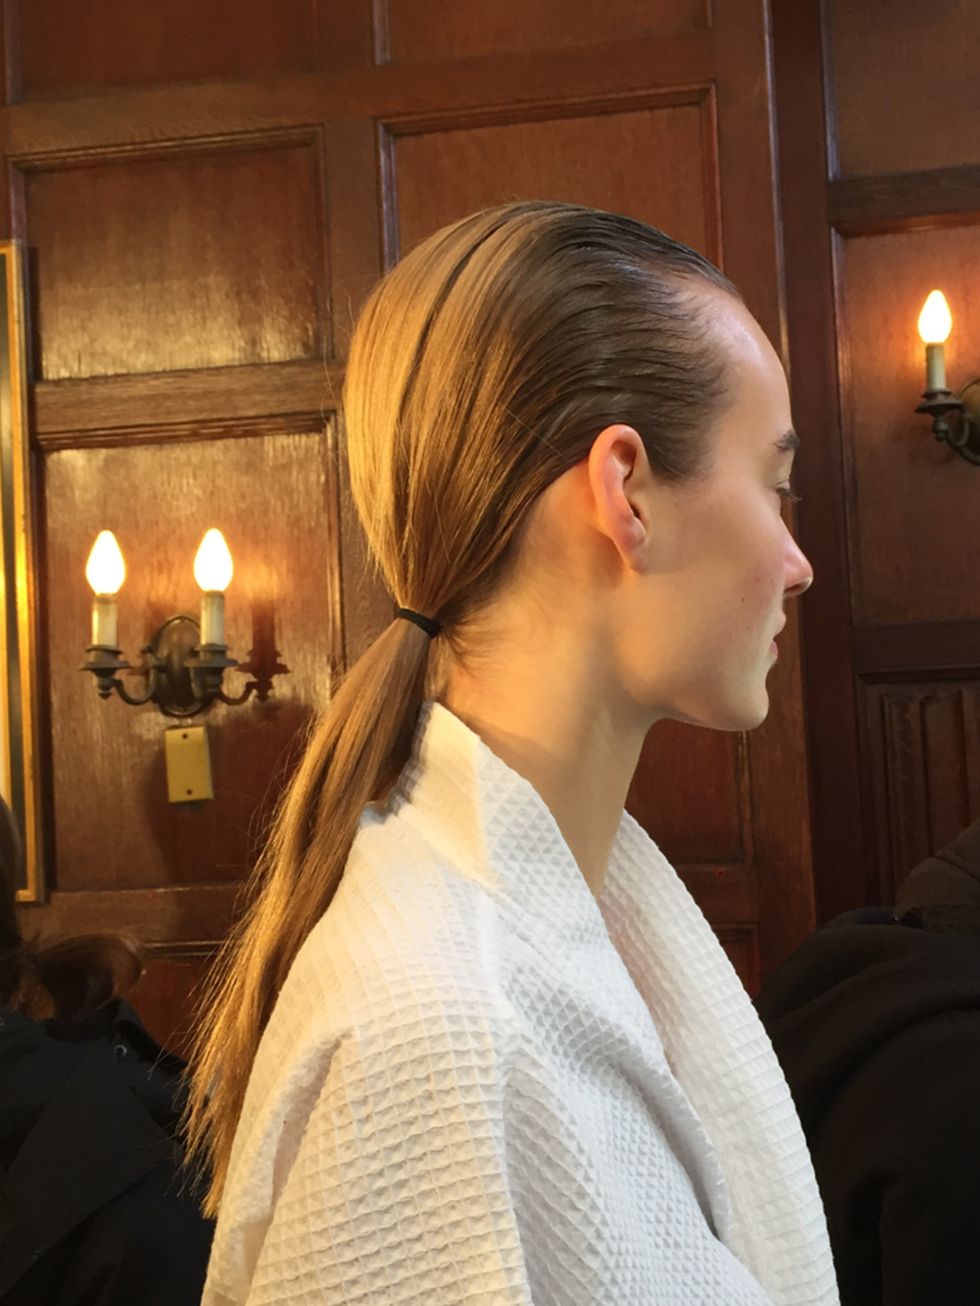 Guido the hair master kept in line with Victoria's 'modern minimalist' with a dual texture pony